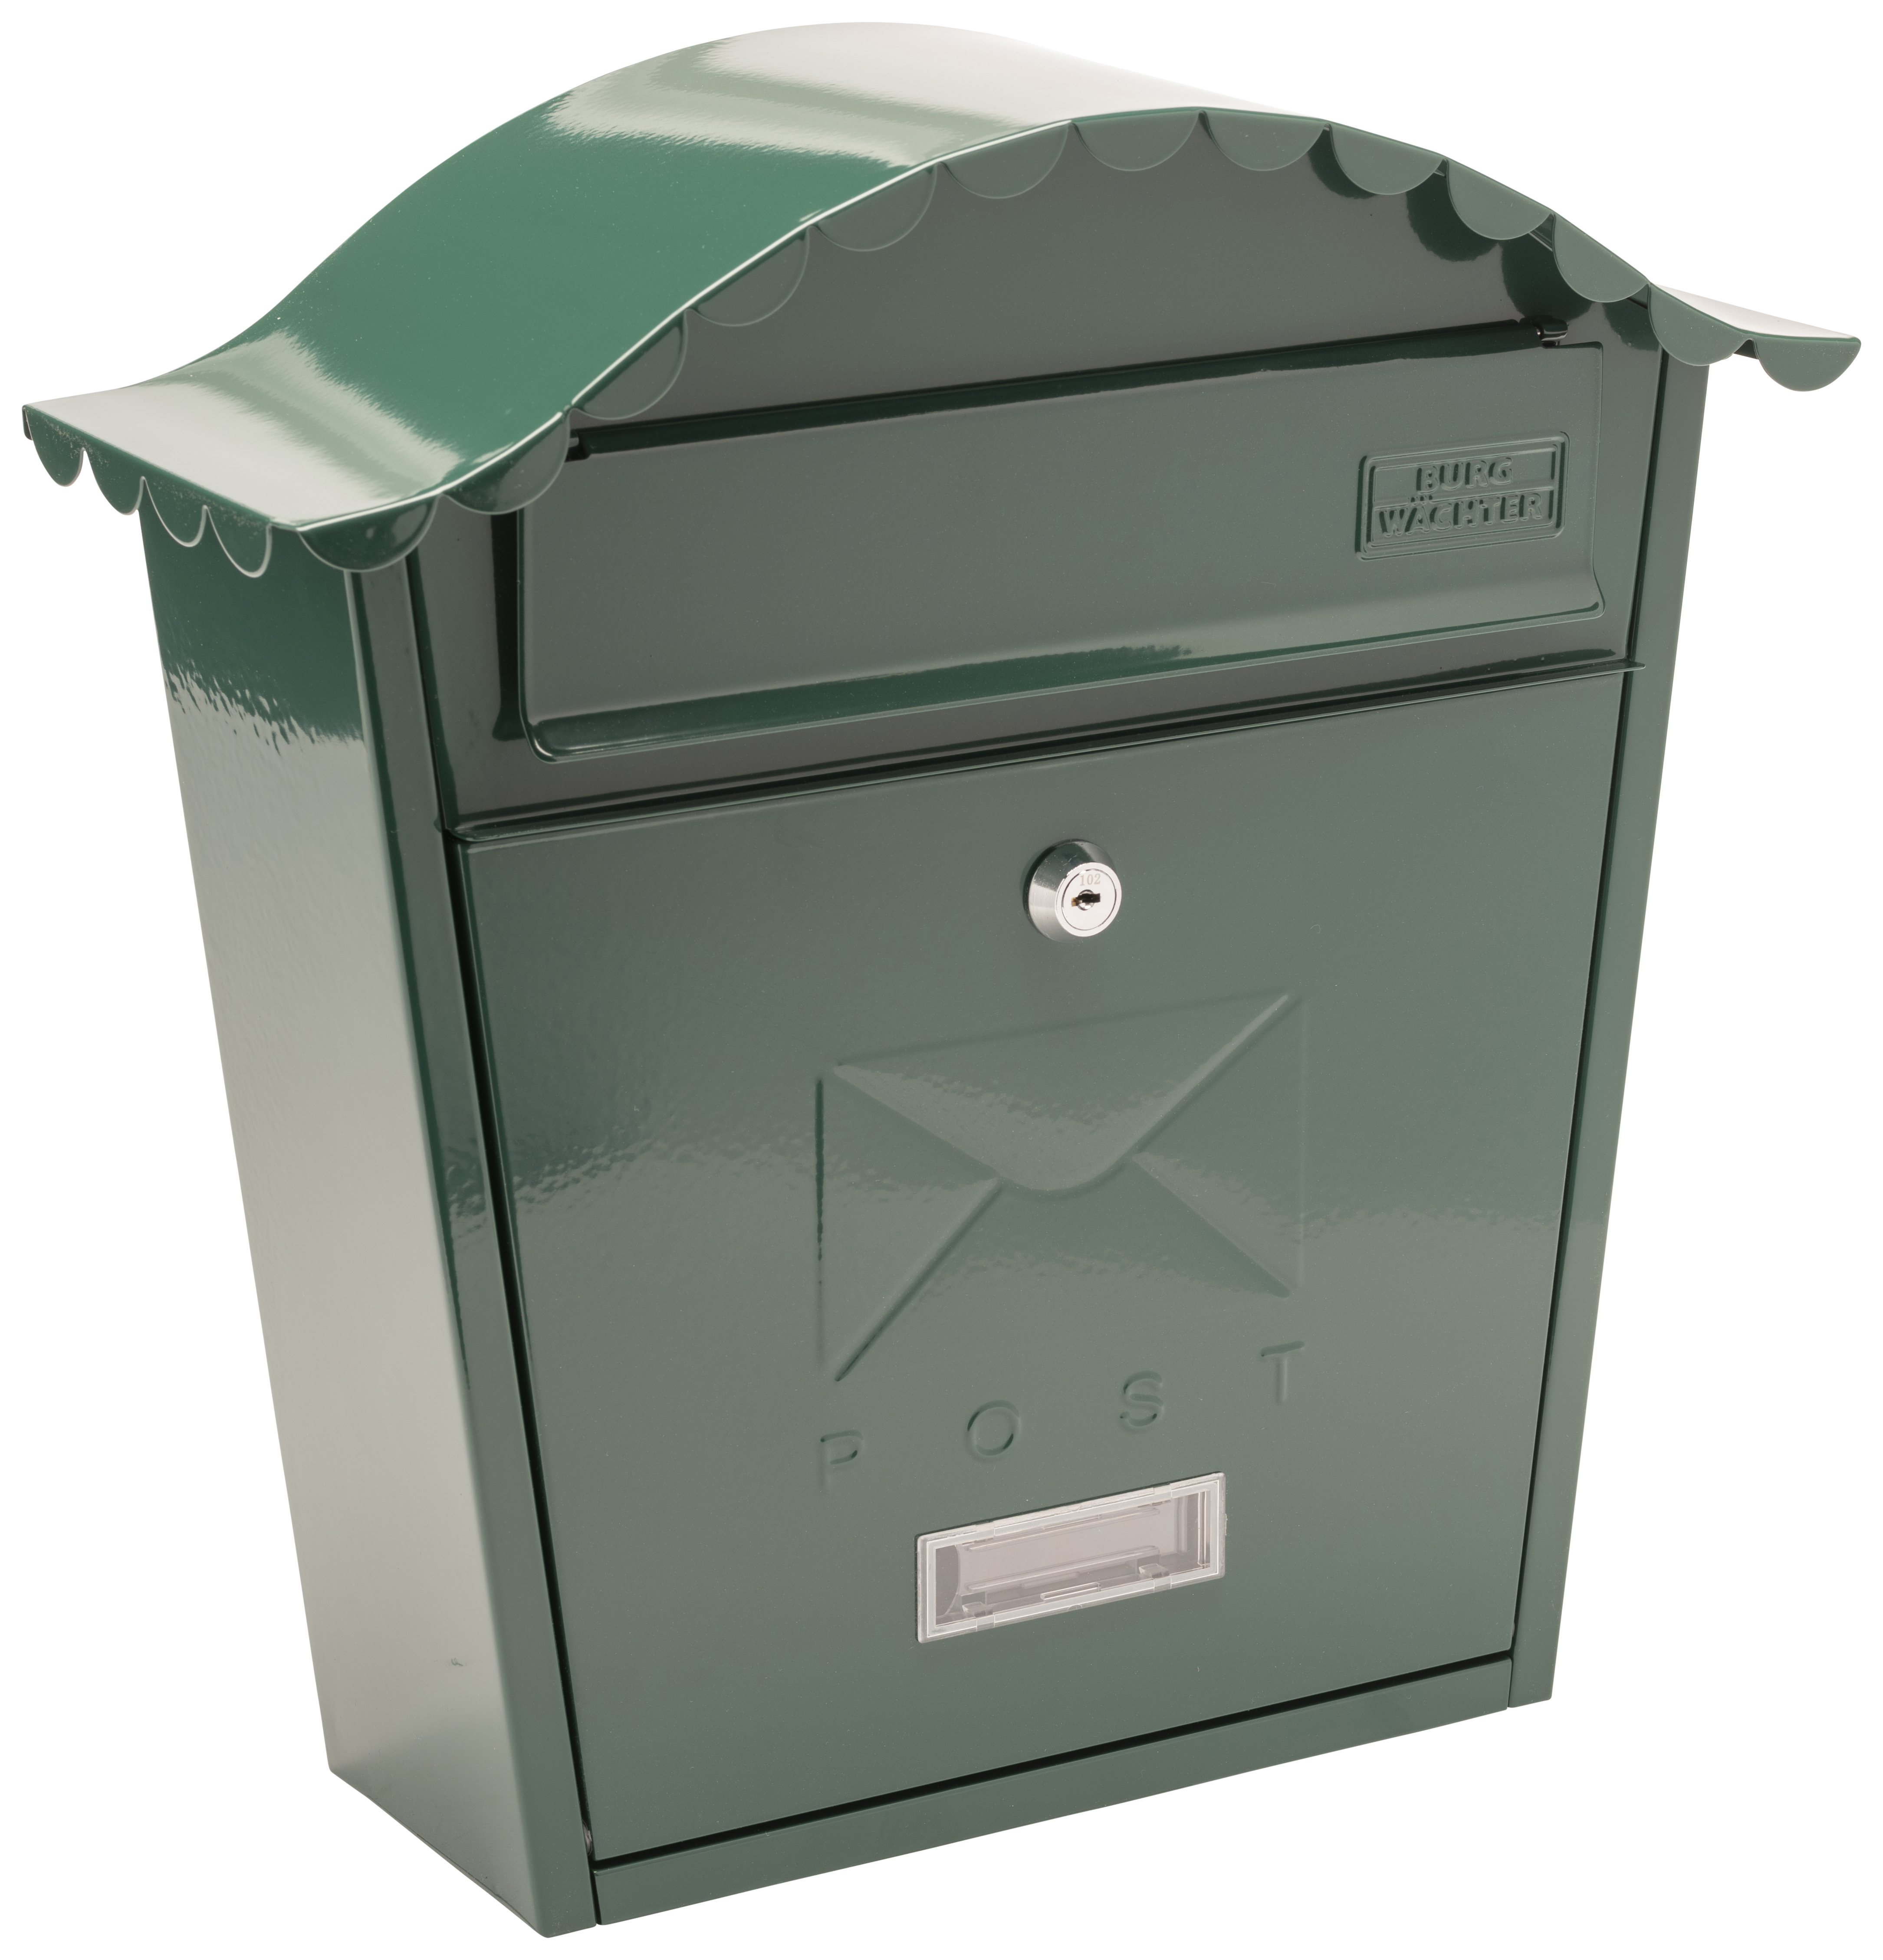 Image of Burg-Wachter Classic Green Post Box